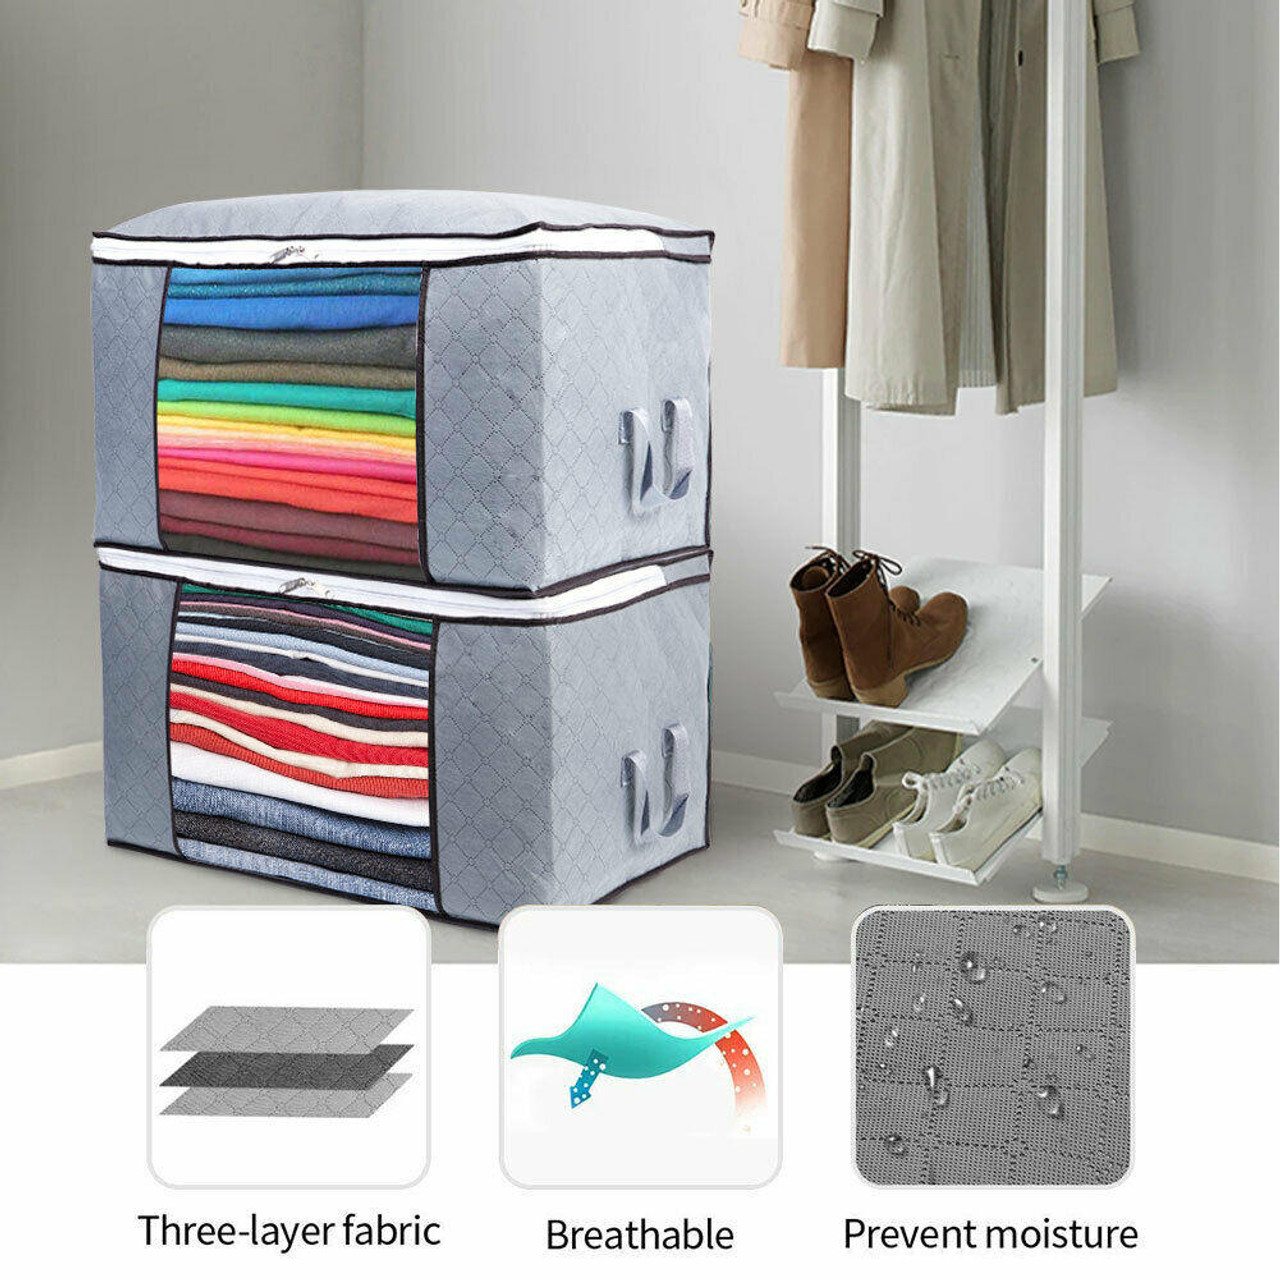 https://cdn11.bigcommerce.com/s-zrh8tkpr8d/images/stencil/1280x1280/products/9943/36052/us-large-anti-dust-clothes-storage-bag-quilt-blanket-storage-sort-home-organizer__71205.1703926945.jpg?c=2&imbypass=on